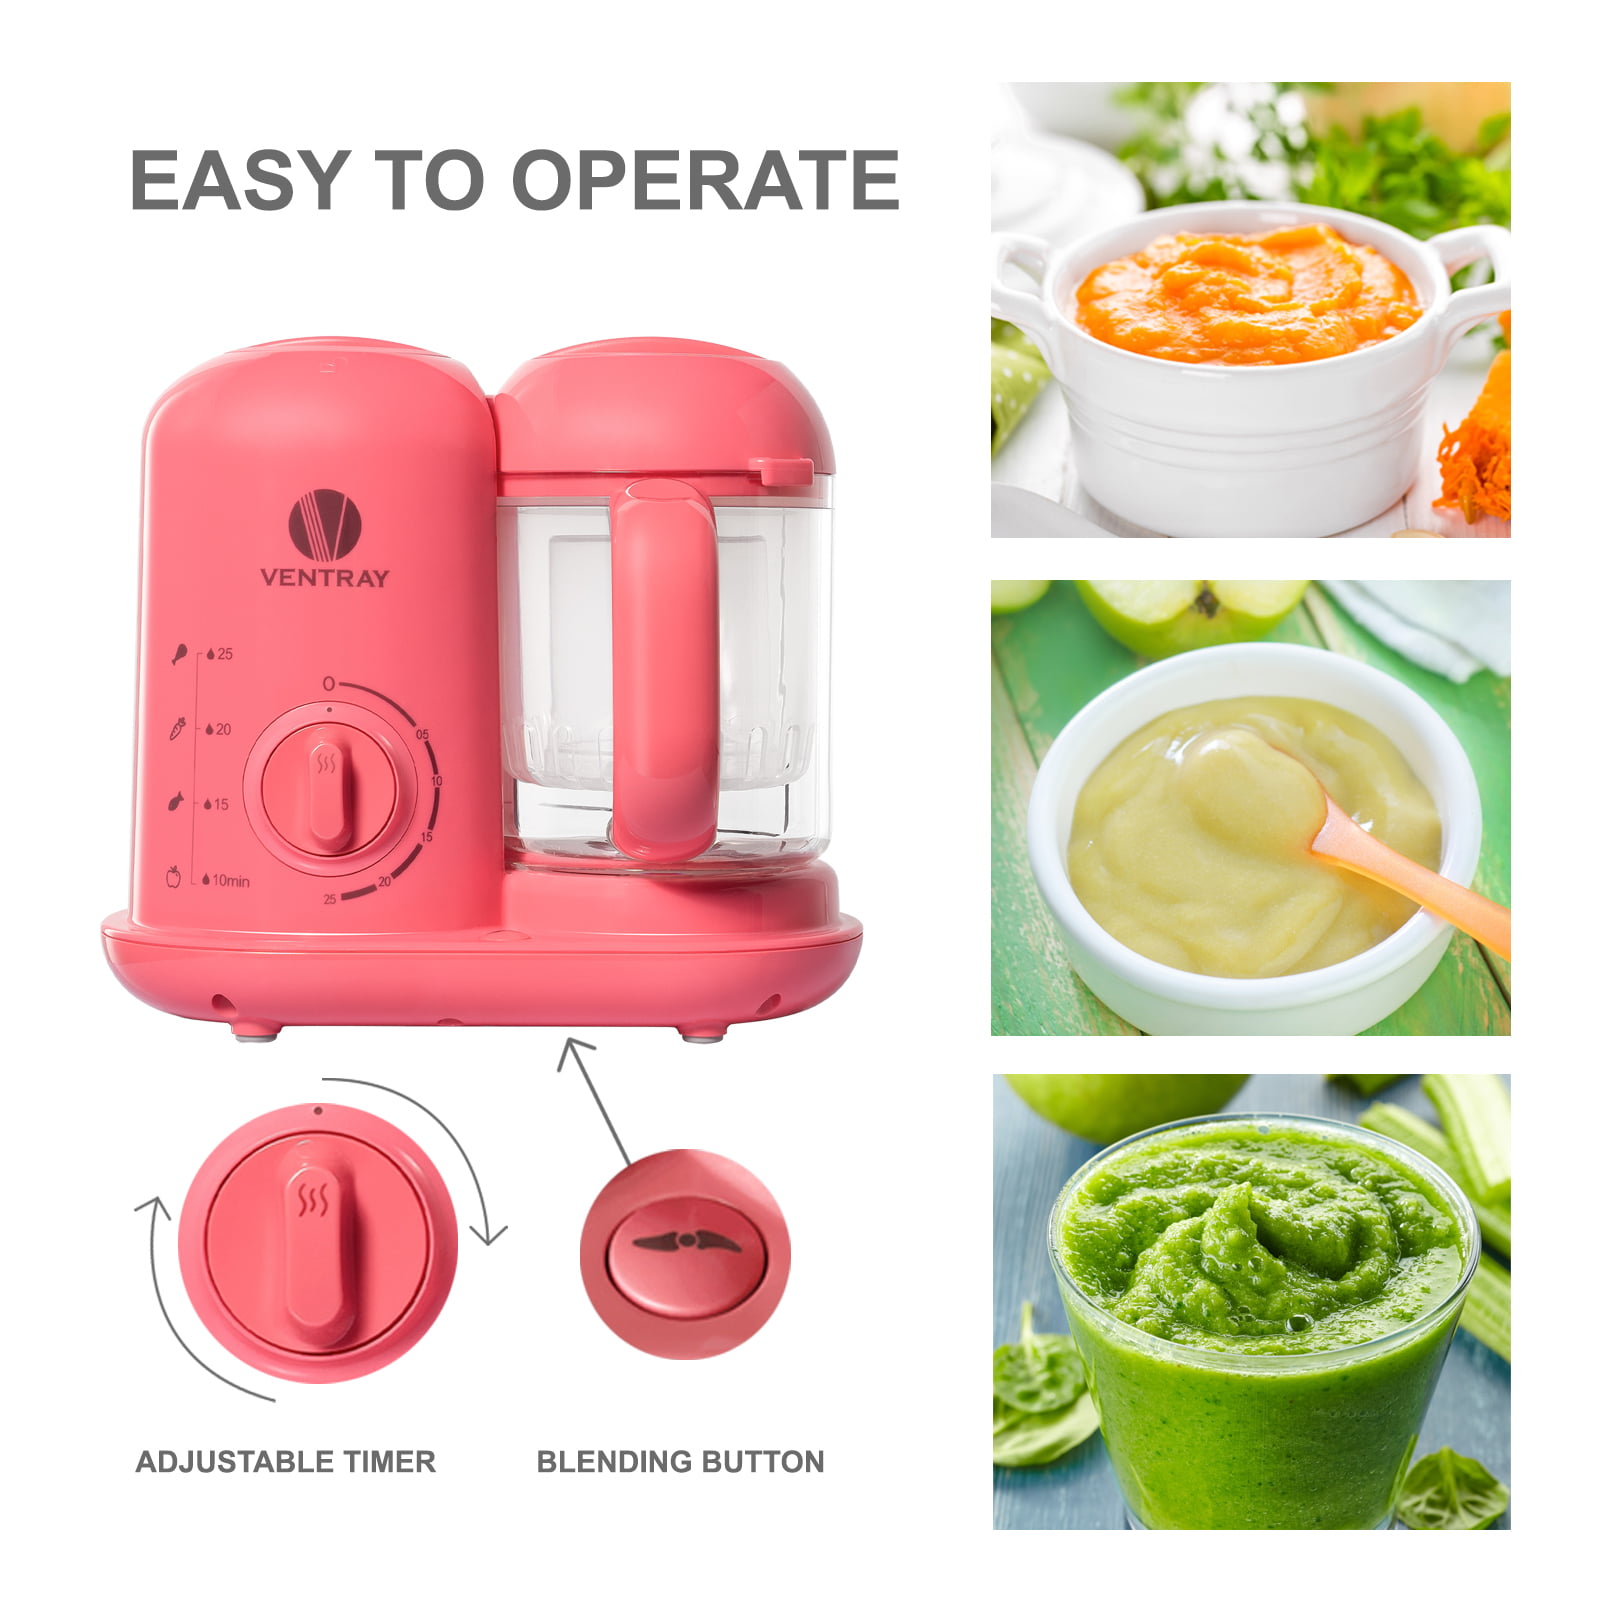 Ventray Baby Food Maker Multi-function All-in-One Processor - Purple